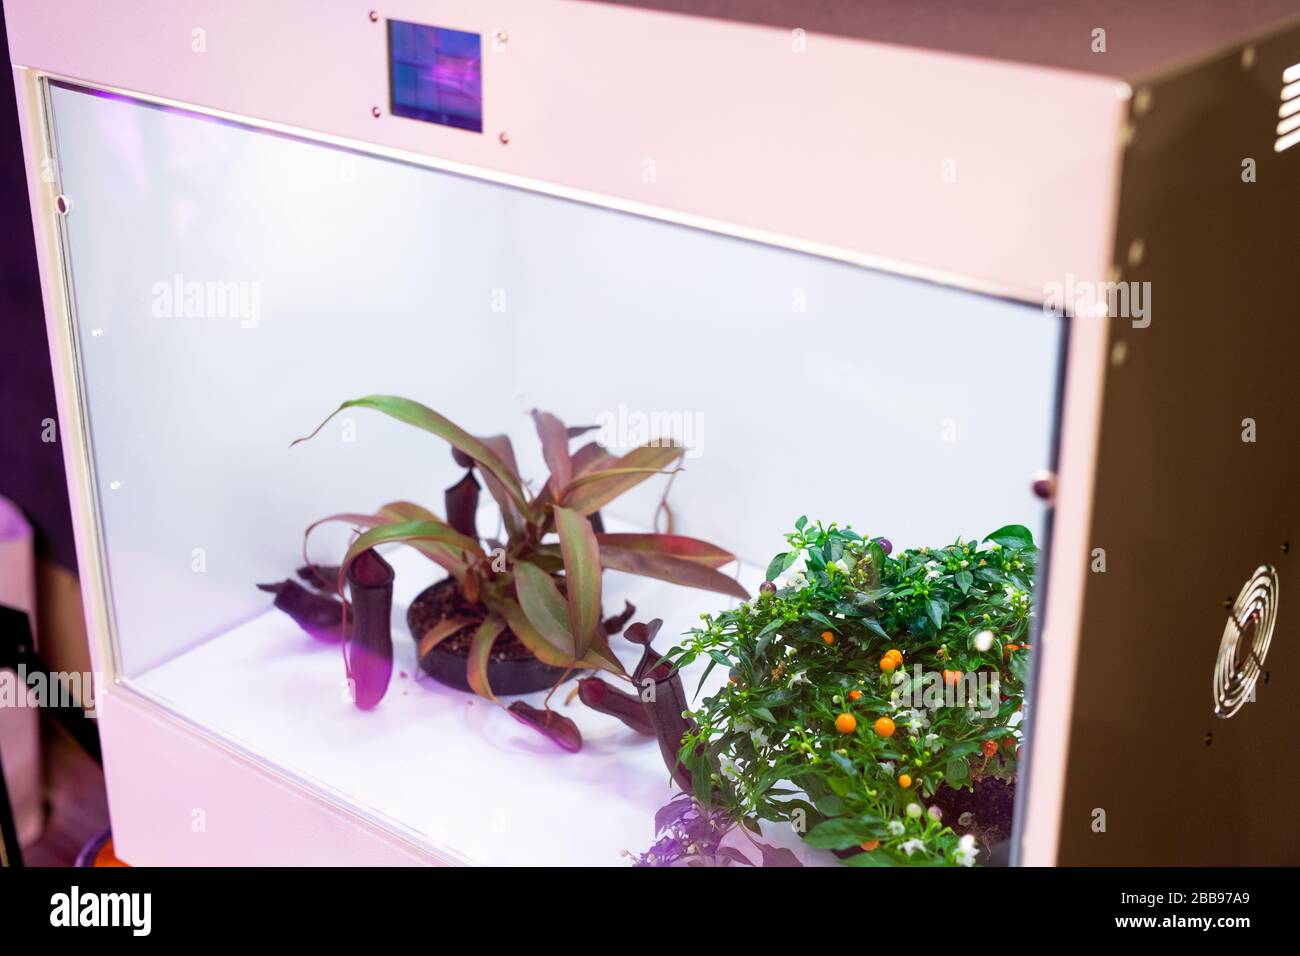 Close-up of small plants in illuminated grow box used for photosynthesis of plants Stock Photo